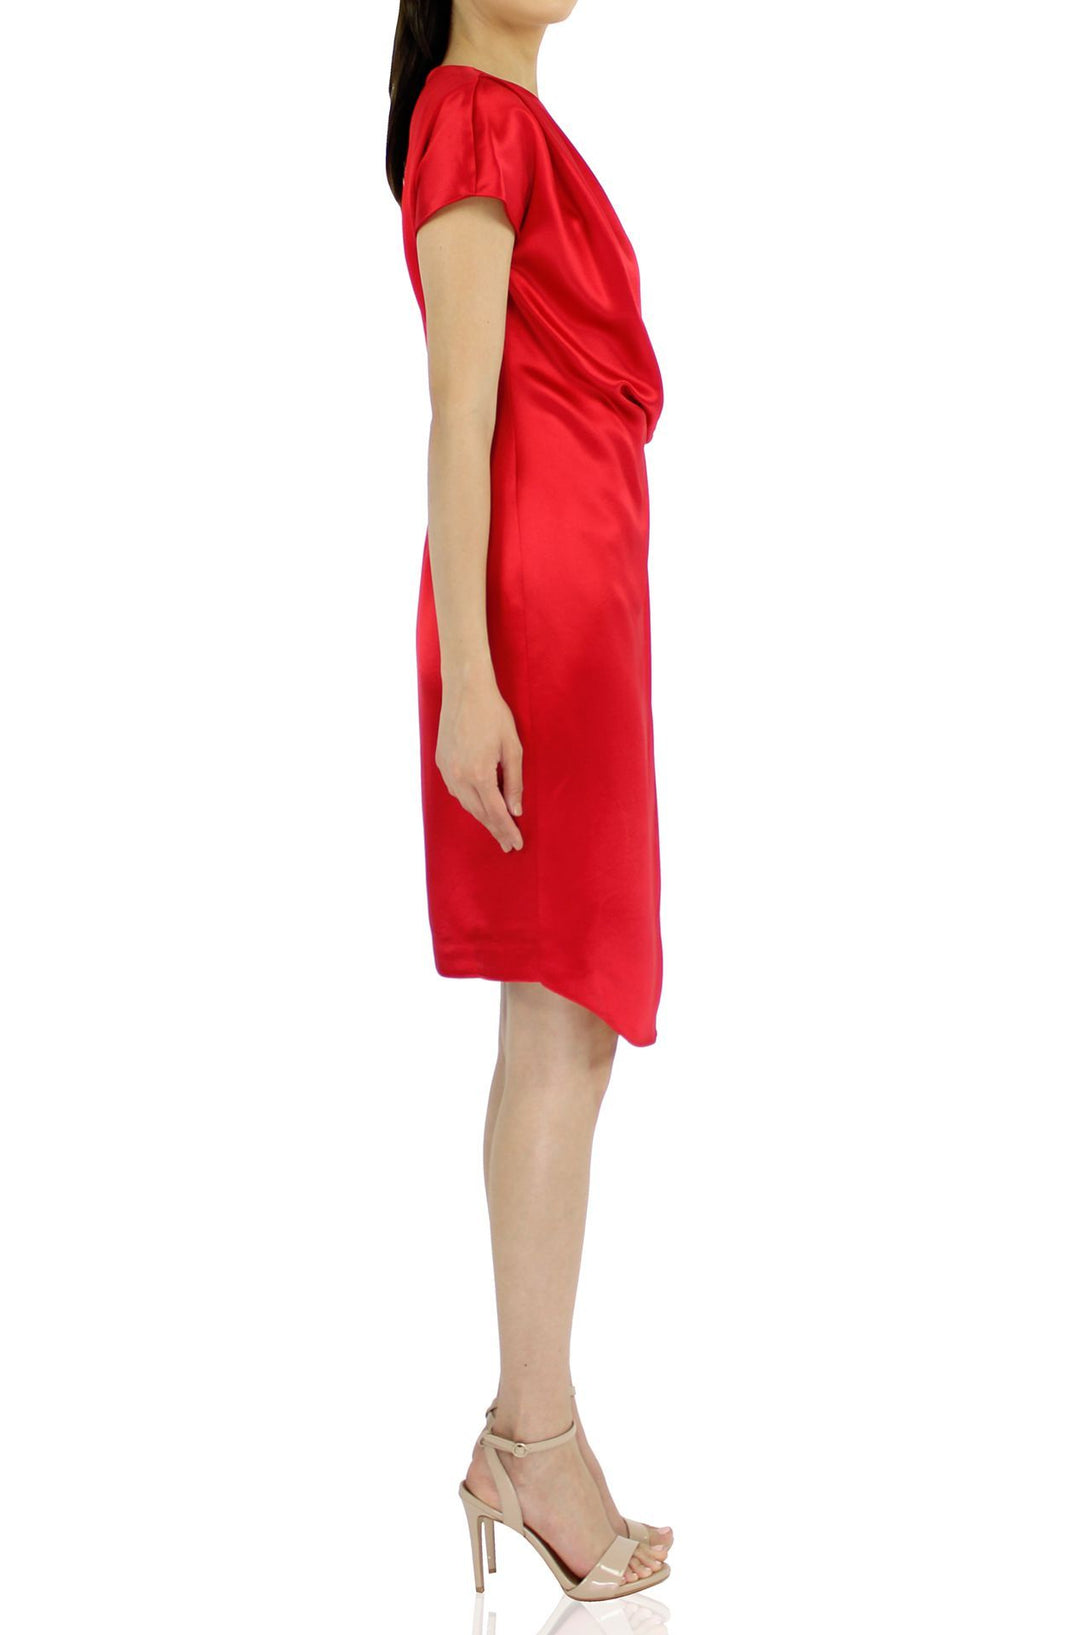 Womens-Designer-Mini-Dress-In-Red-By-Kyle-Richard